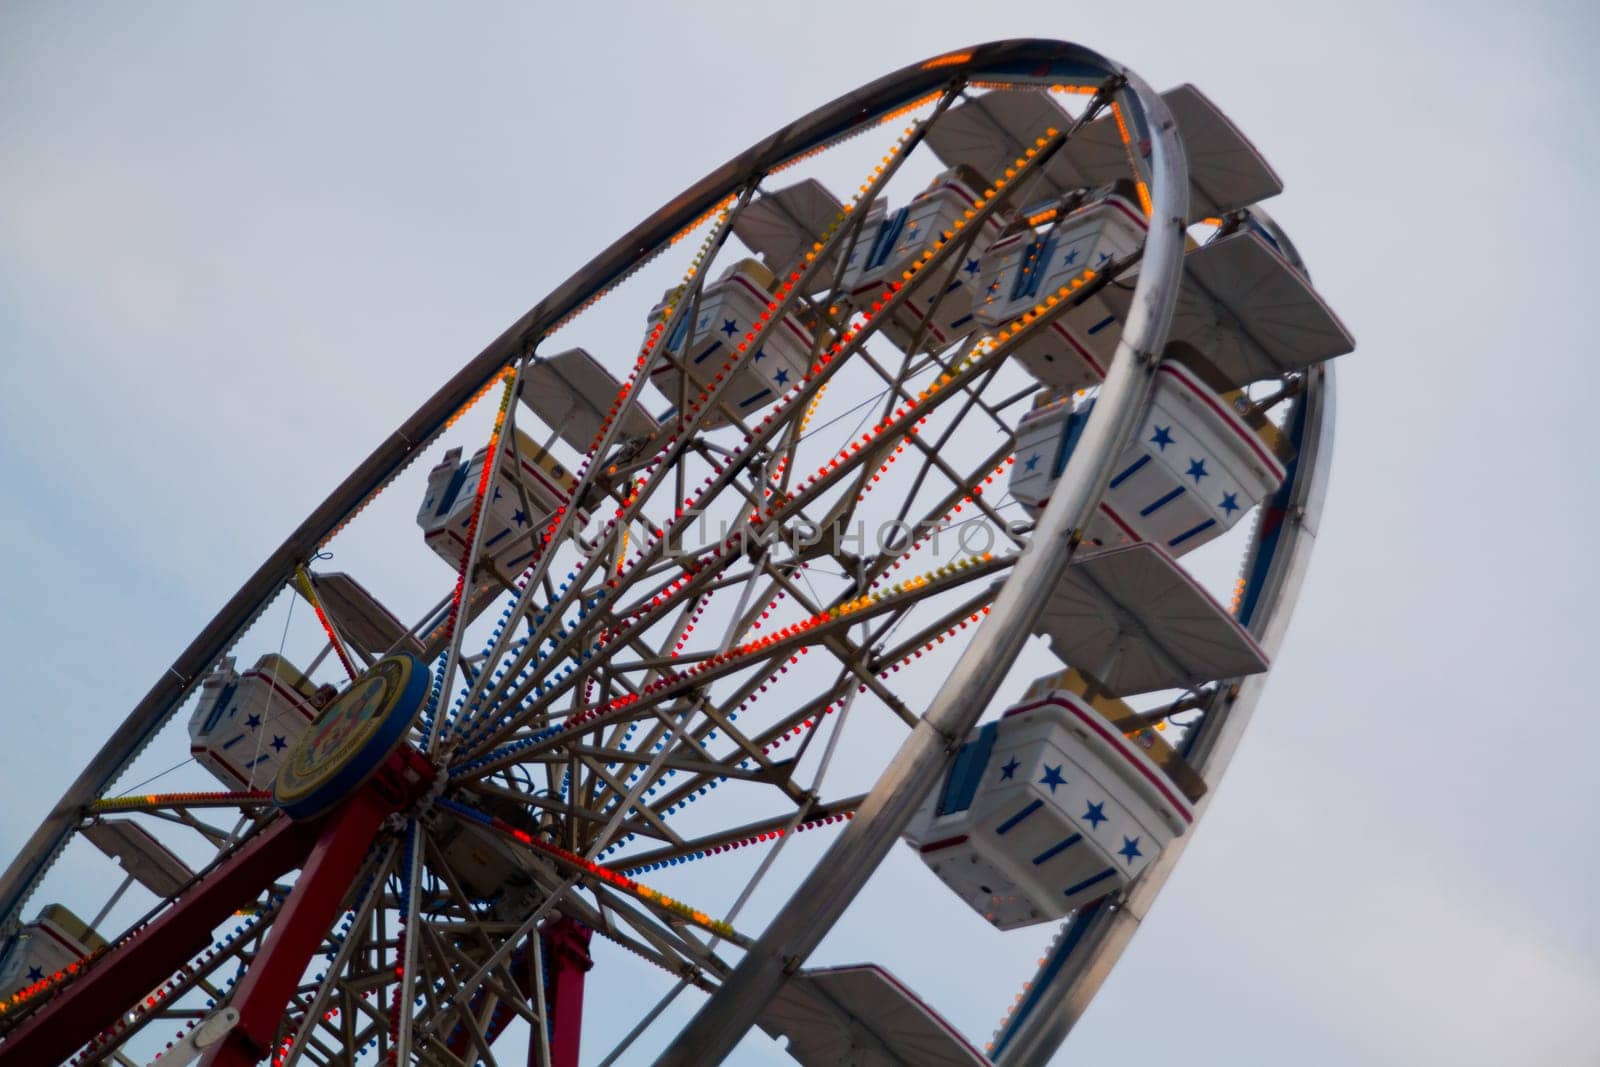 Experience the excitement of a vibrant Ferris wheel at twilight in Gatlinburg, Tennessee. This Americana-themed ride adorned with warm lights and starry gondolas invites you to enjoy the thrill of a fair.